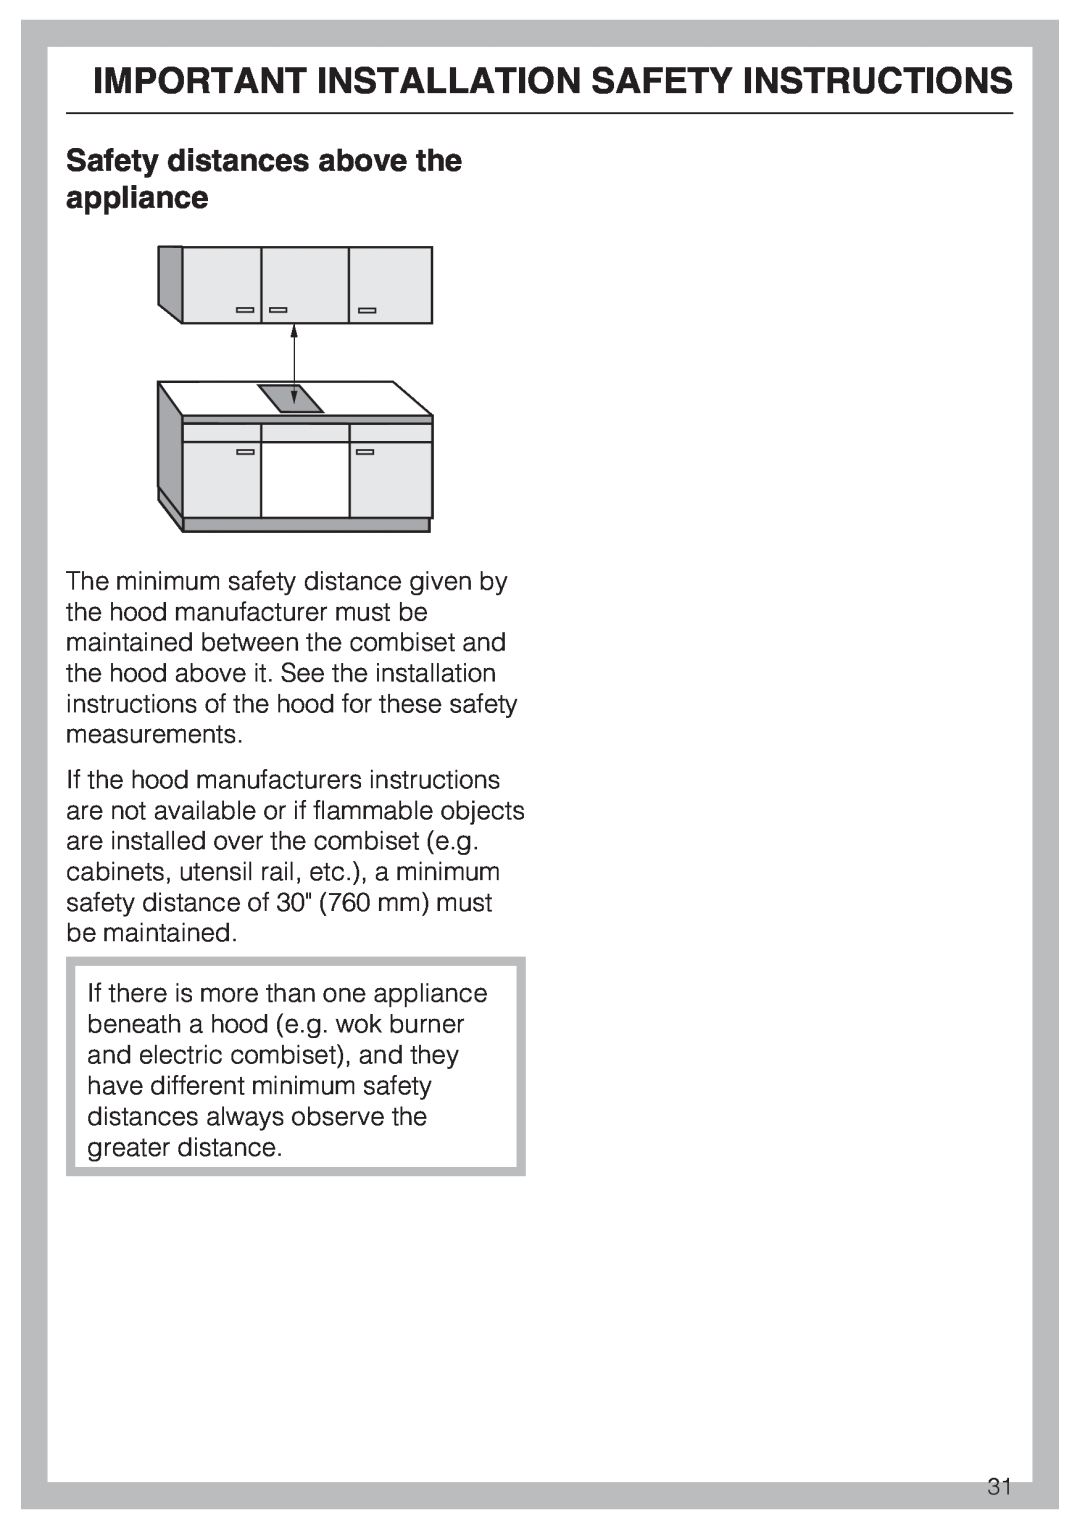 Miele CS 1221 installation instructions Safety distances above the appliance, Important Installation Safety Instructions 